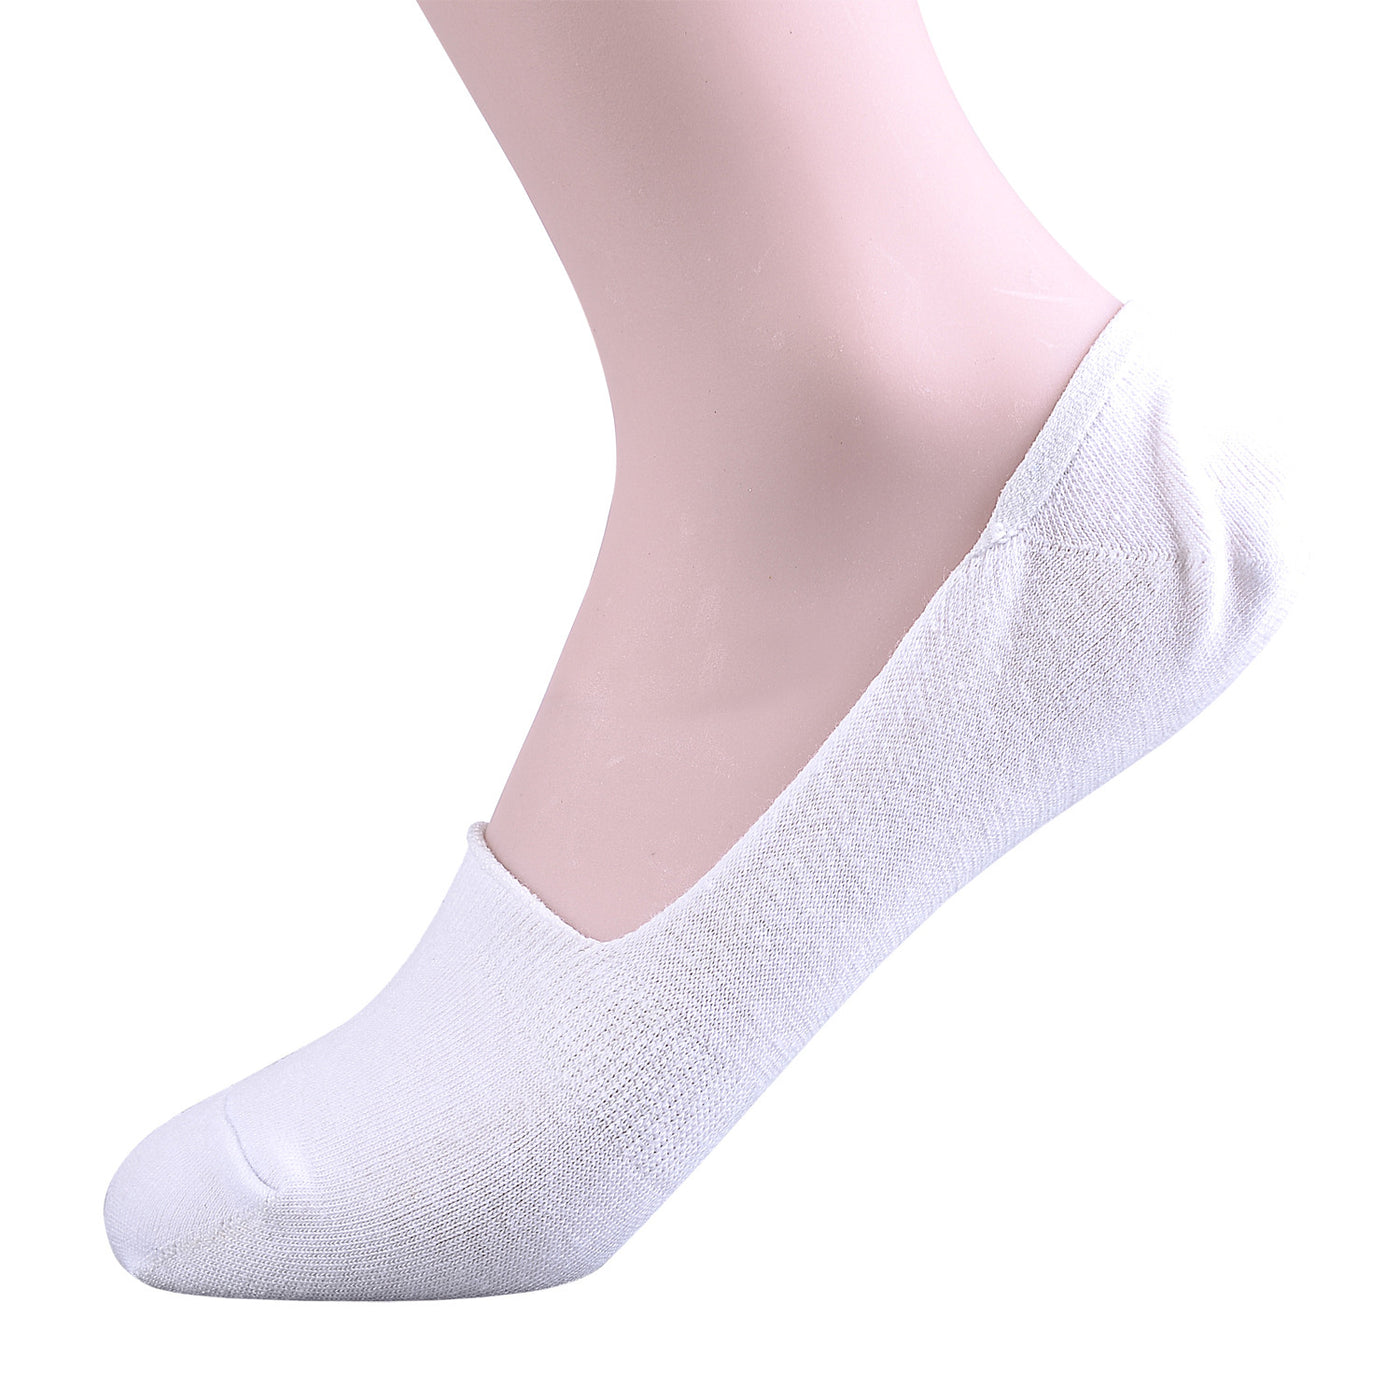 2 Pairs Finest Combed Cotton Invisible Socks Plain White